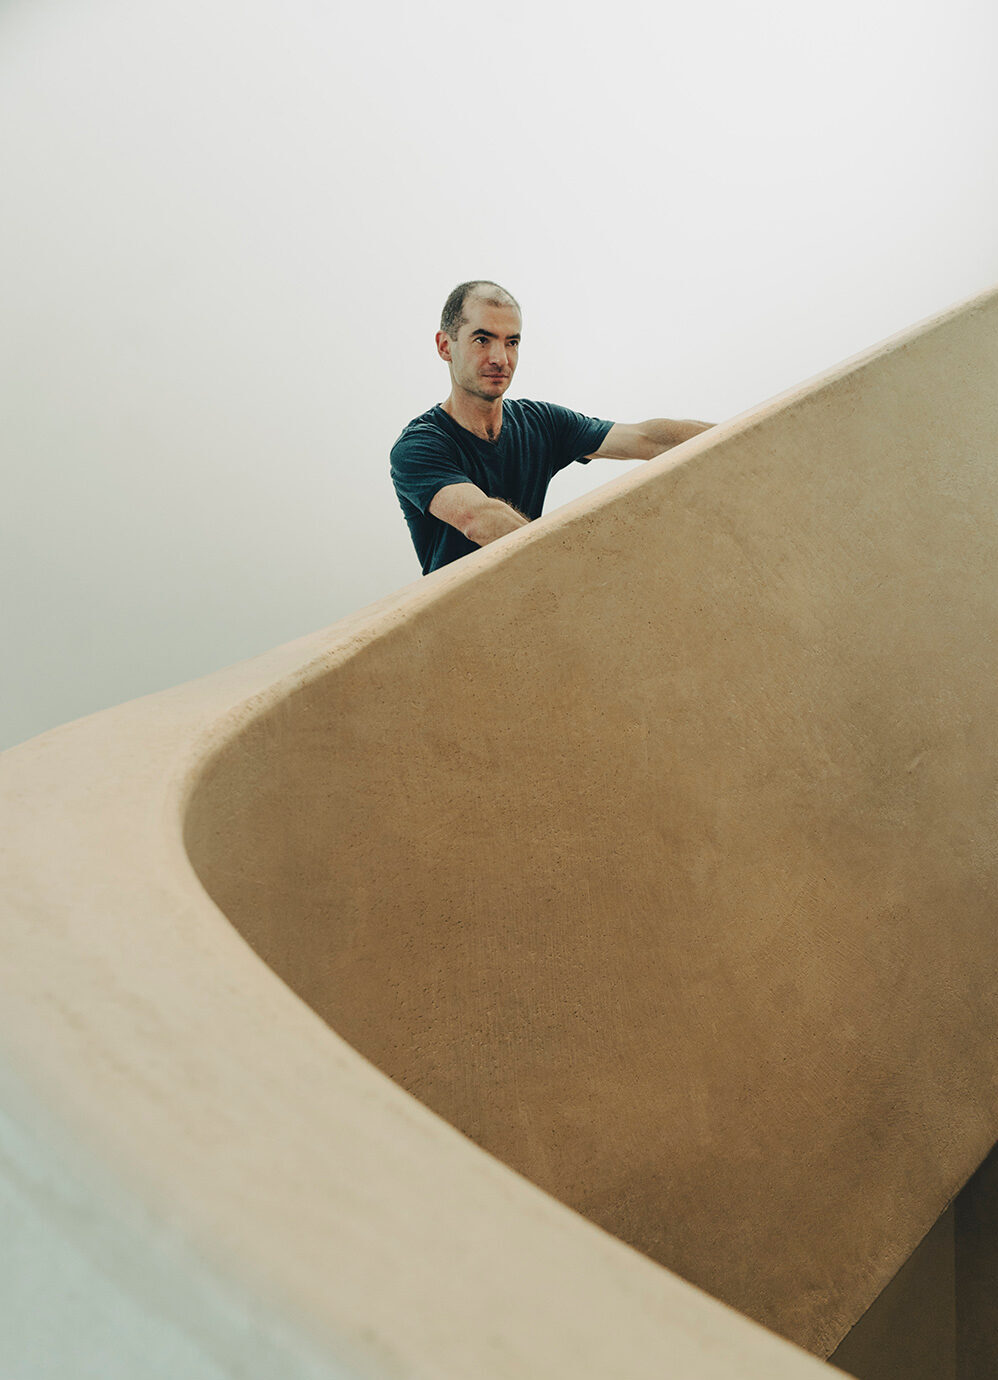 Ilya Sutskever standing on a staircase with beige-coloured curved sides